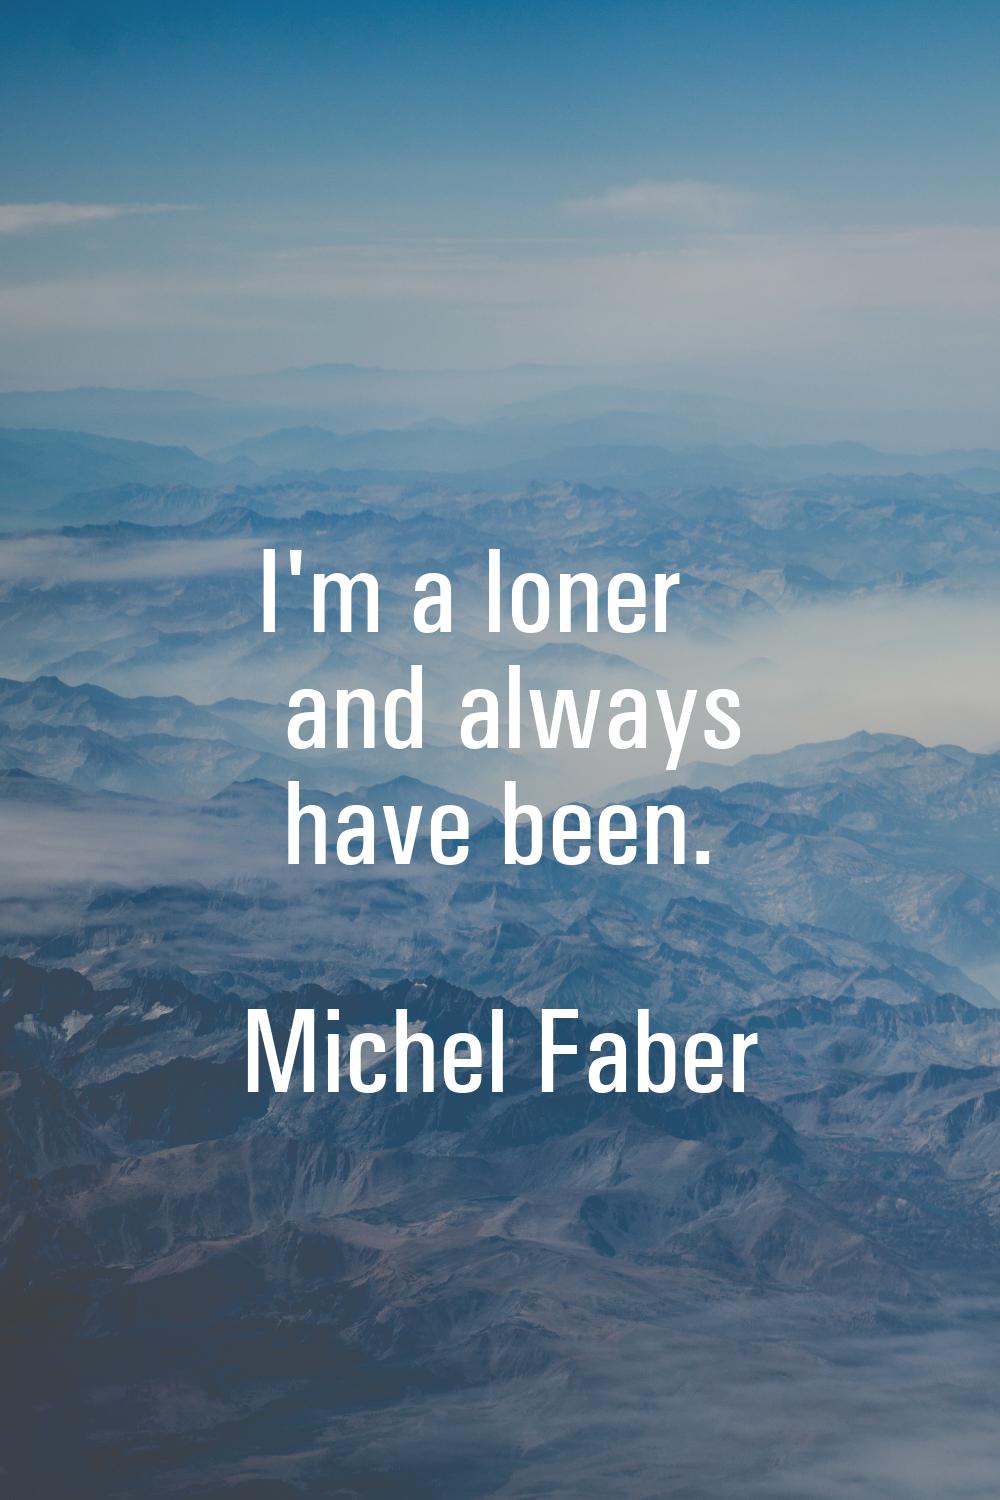 I'm a loner and always have been.